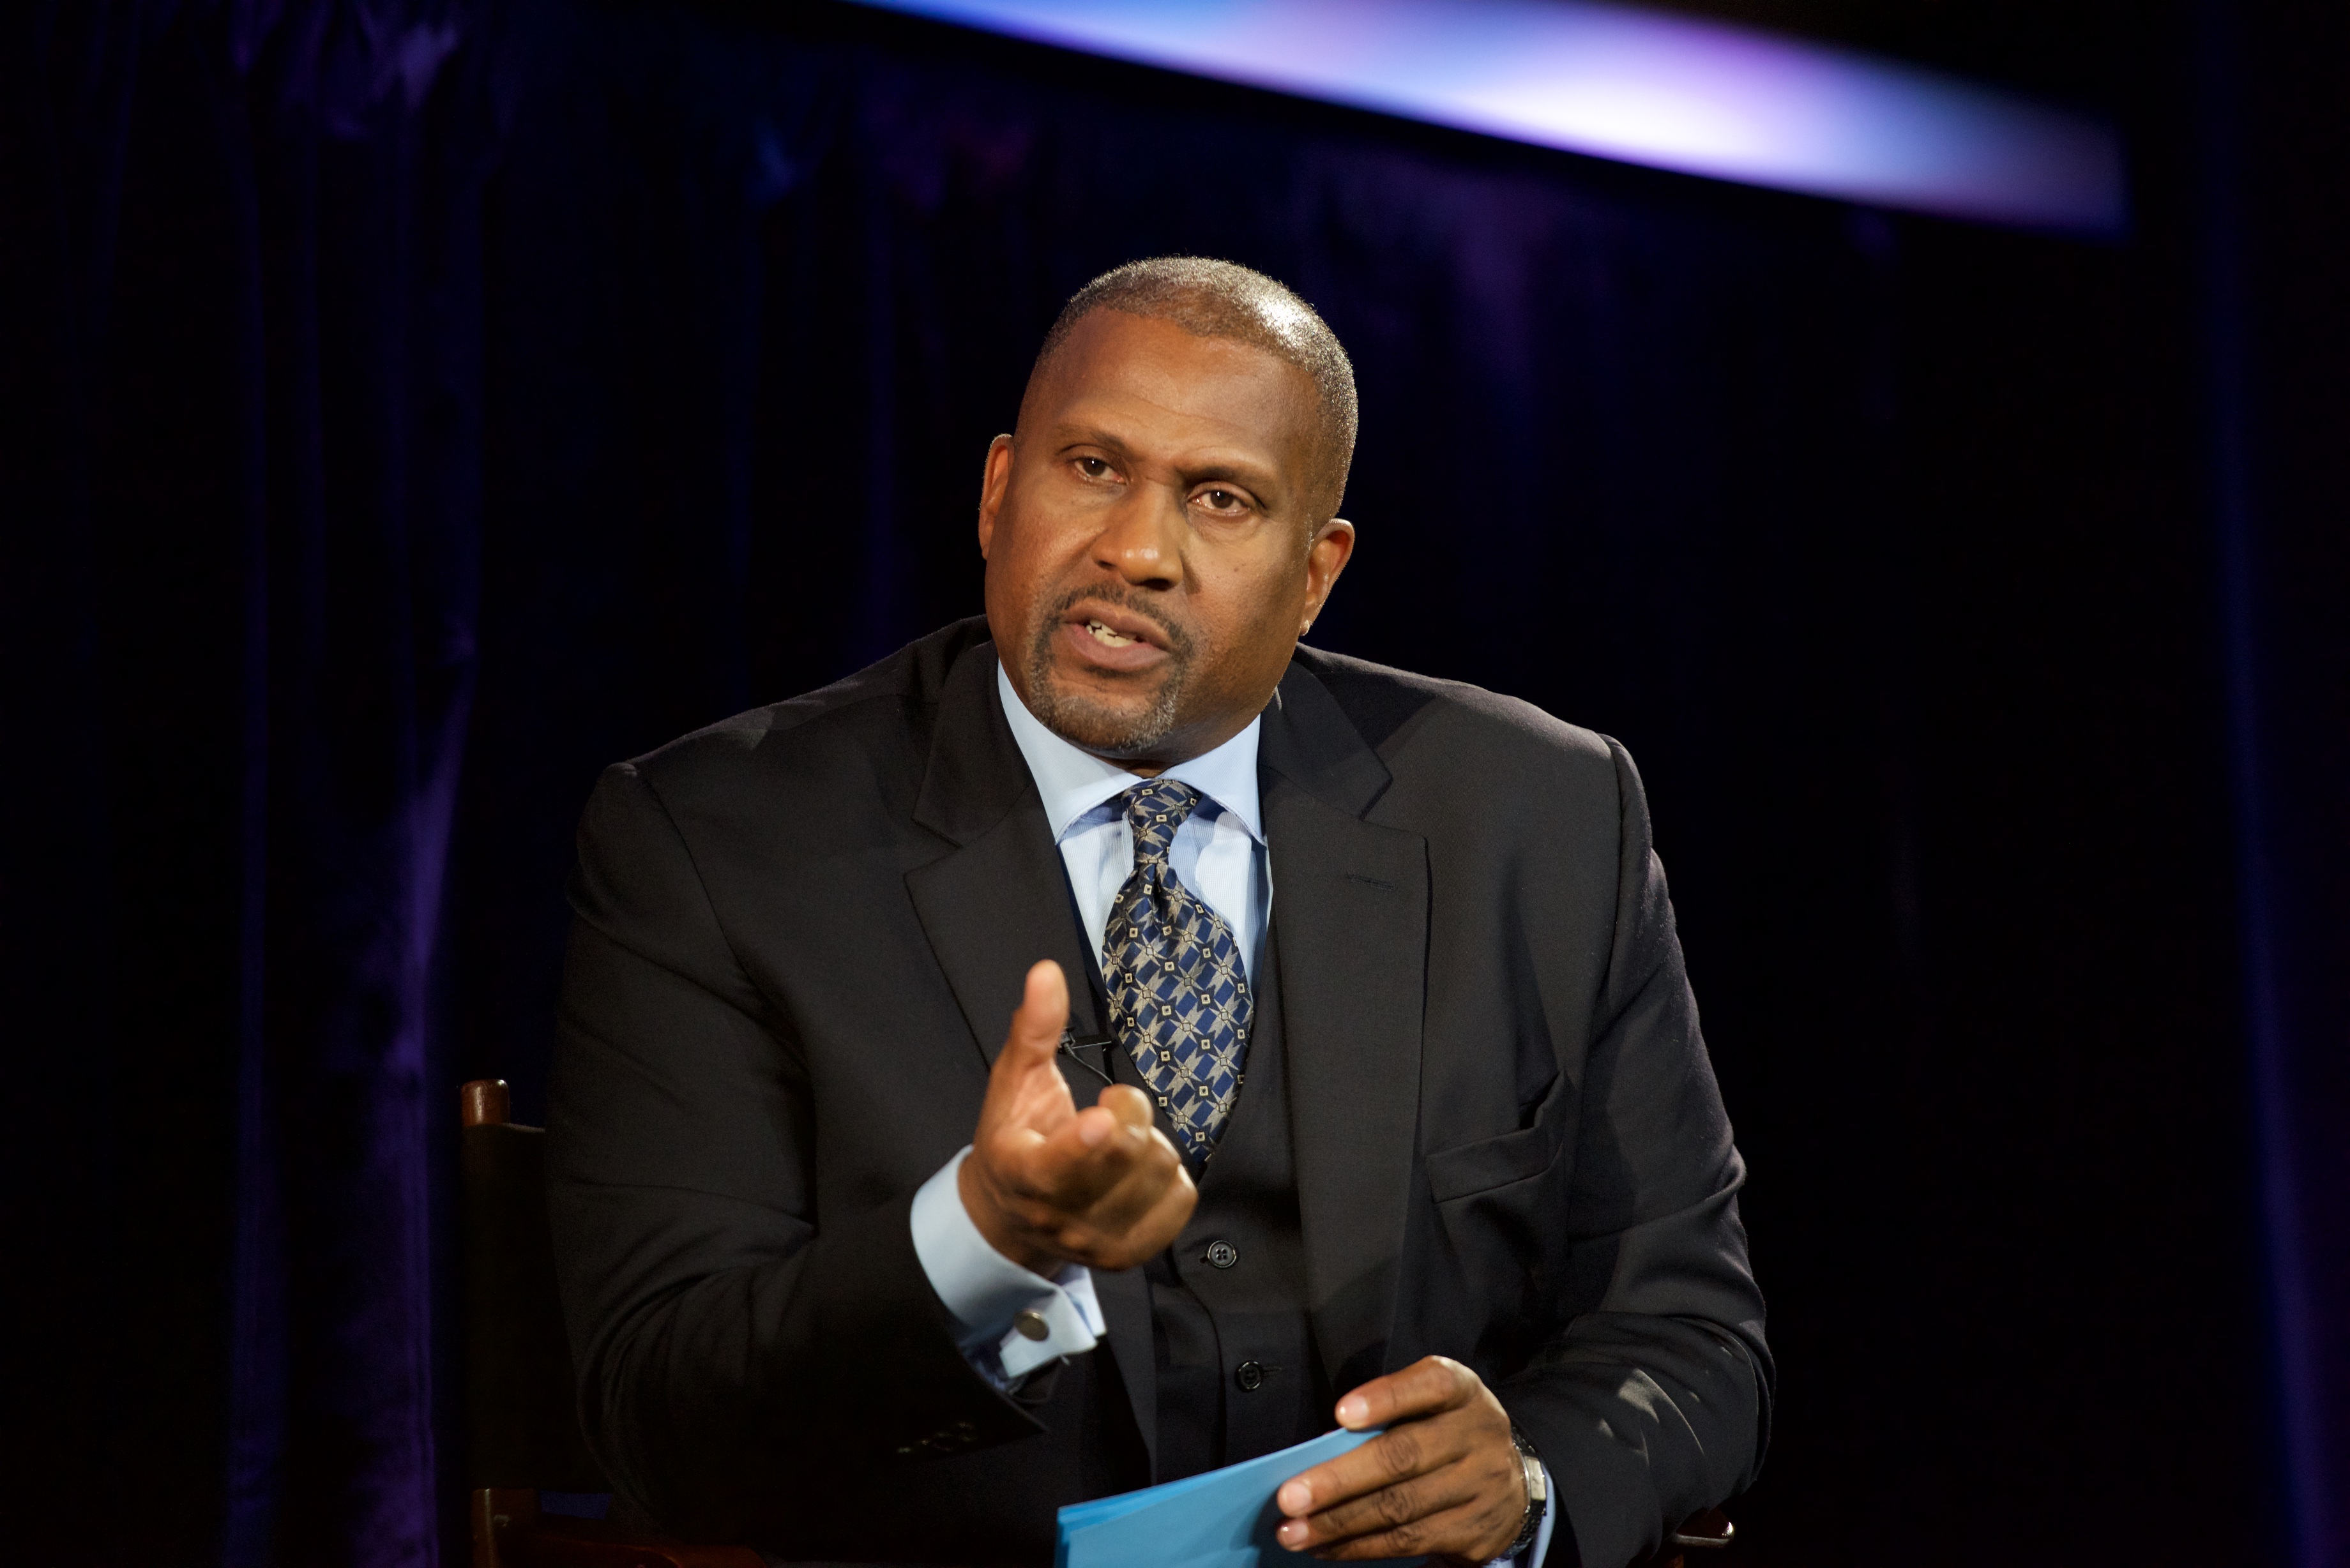 Tavis Smiley officiates Courting Justice: Little Rock, Arkansas at Central Arkansas Library on Sept. 23, 2016 in Little Rock, Arkansa. (Earl Gibson III—Getty Images)